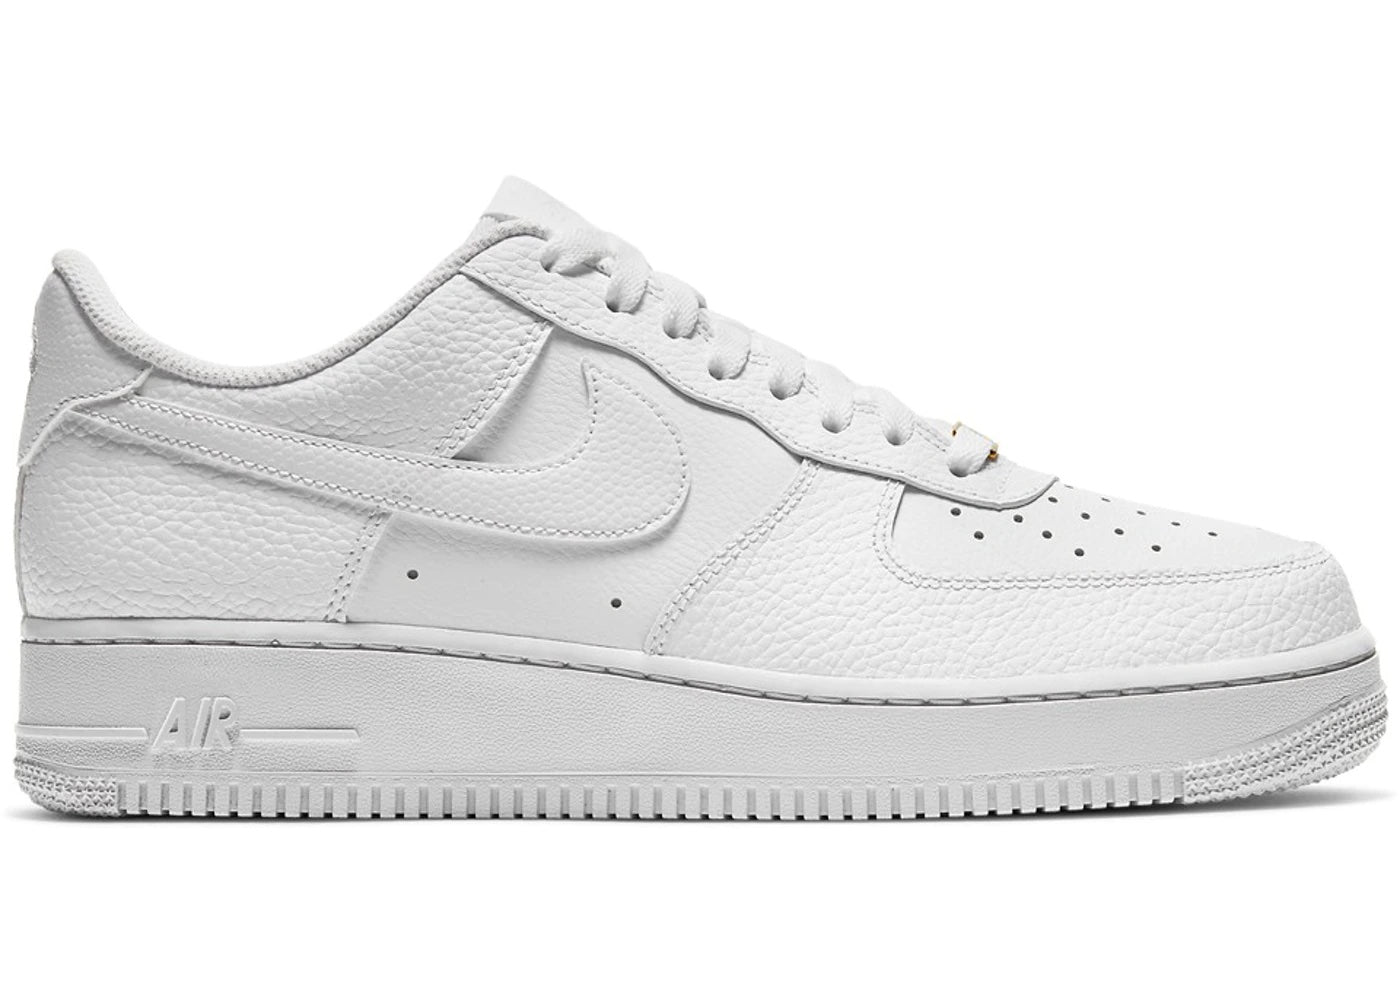 Nike Air Force 1 Low White Tumbled Leather - Supra Sneakers